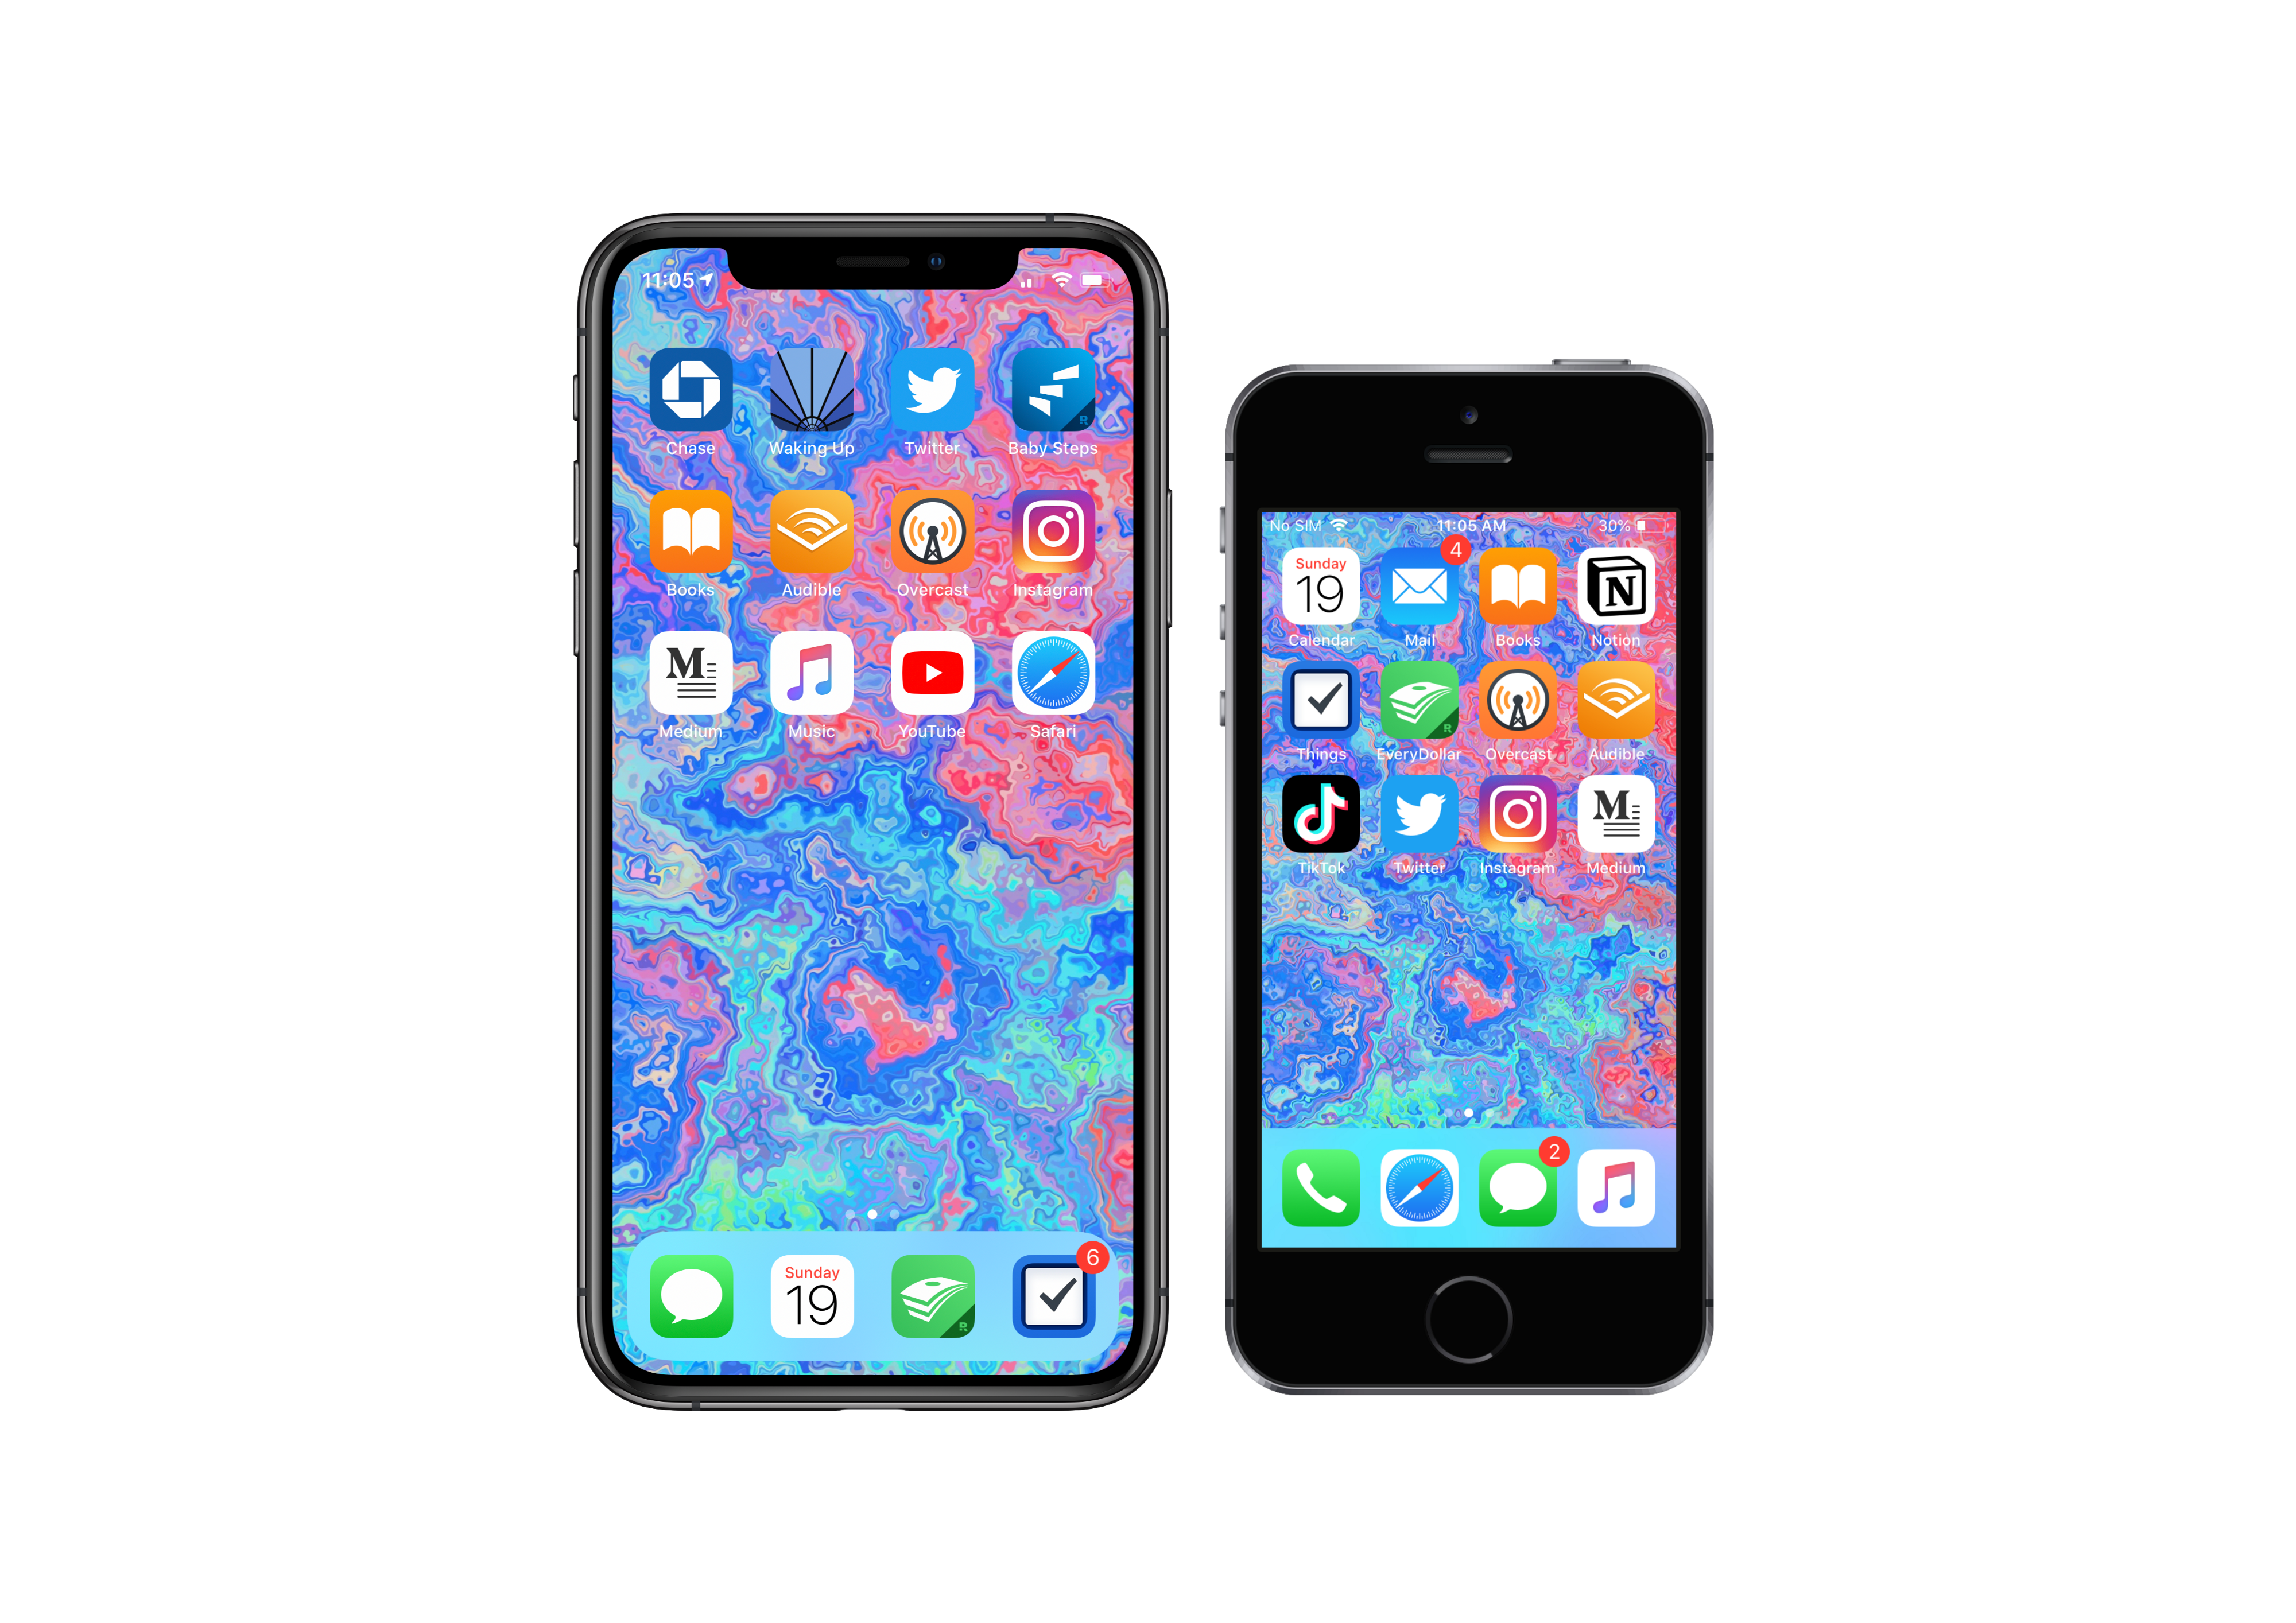 iPhone 11 Pro on the right and iPhone 5s on the left showing the homescreen.